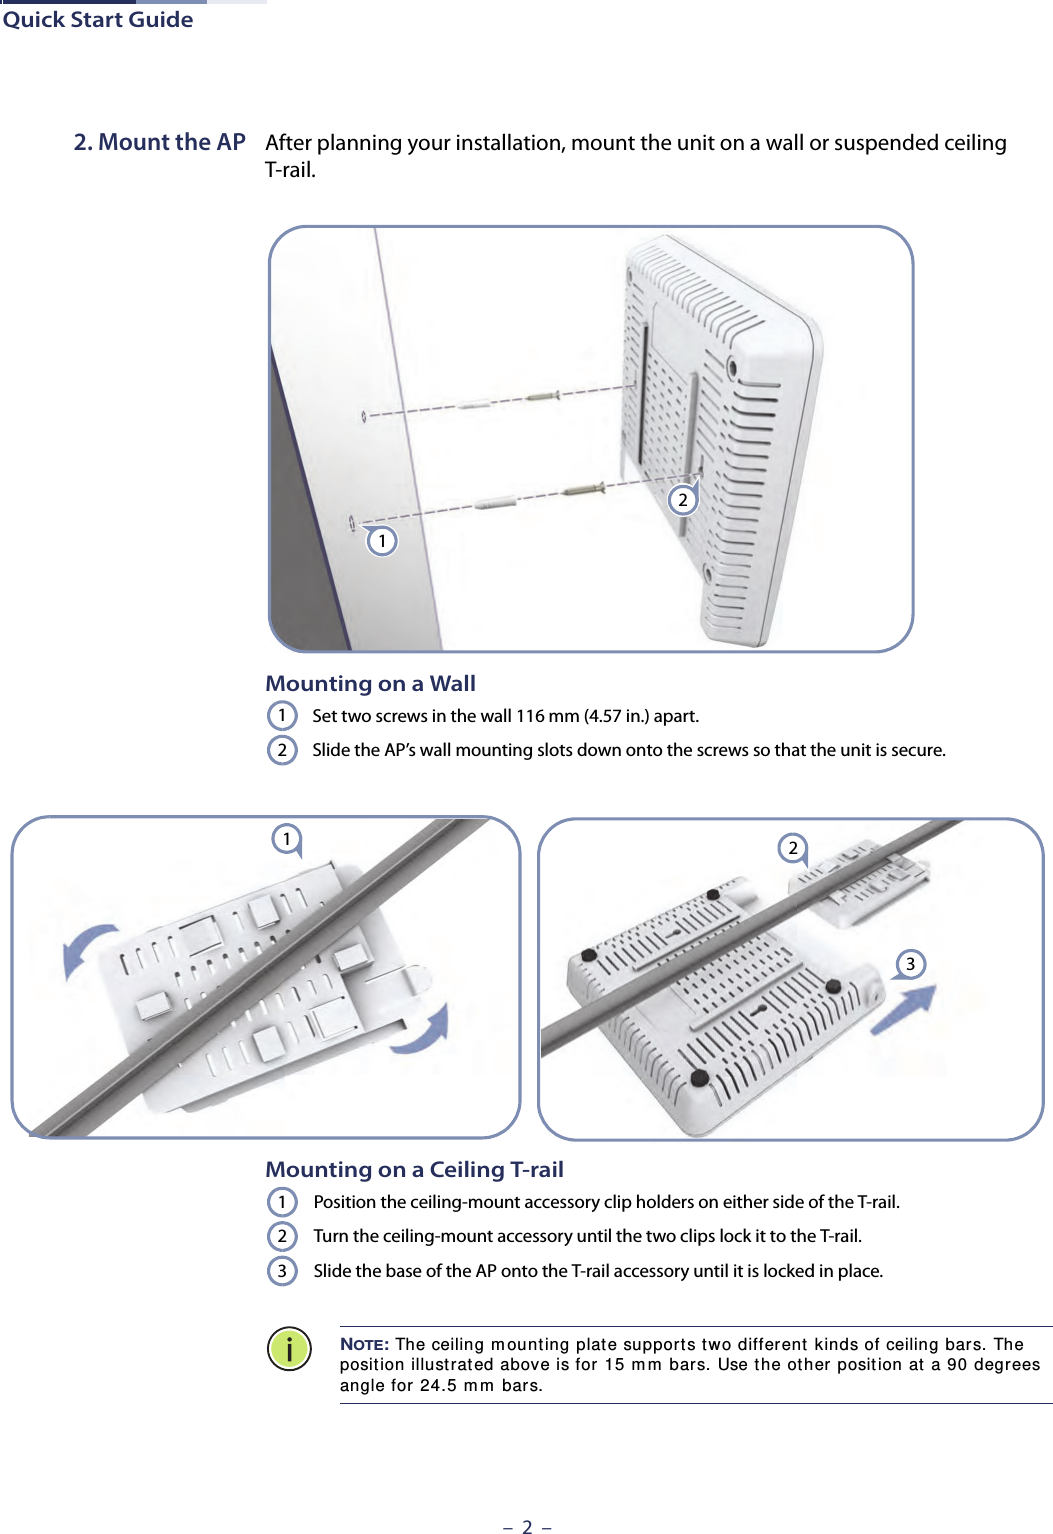 Quick Start Guide–  2  –2. Mount the AP After planning your installation, mount the unit on a wall or suspended ceiling T-rail. Mounting on a WallSet two screws in the wall 116 mm (4.57 in.) apart.Slide the AP’s wall mounting slots down onto the screws so that the unit is secure.2112231Mounting on a Ceiling T-railPosition the ceiling-mount accessory clip holders on either side of the T-rail.Turn the ceiling-mount accessory until the two clips lock it to the T-rail.Slide the base of the AP onto the T-rail accessory until it is locked in place.NOTE: The ceiling m ount ing plat e support s tw o differ ent kinds of ceiling bars. The position illustrat ed above is for 15 m m  bars. Use t he ot her posit ion at a 90 degrees angle for  24.5 m m  bars.123